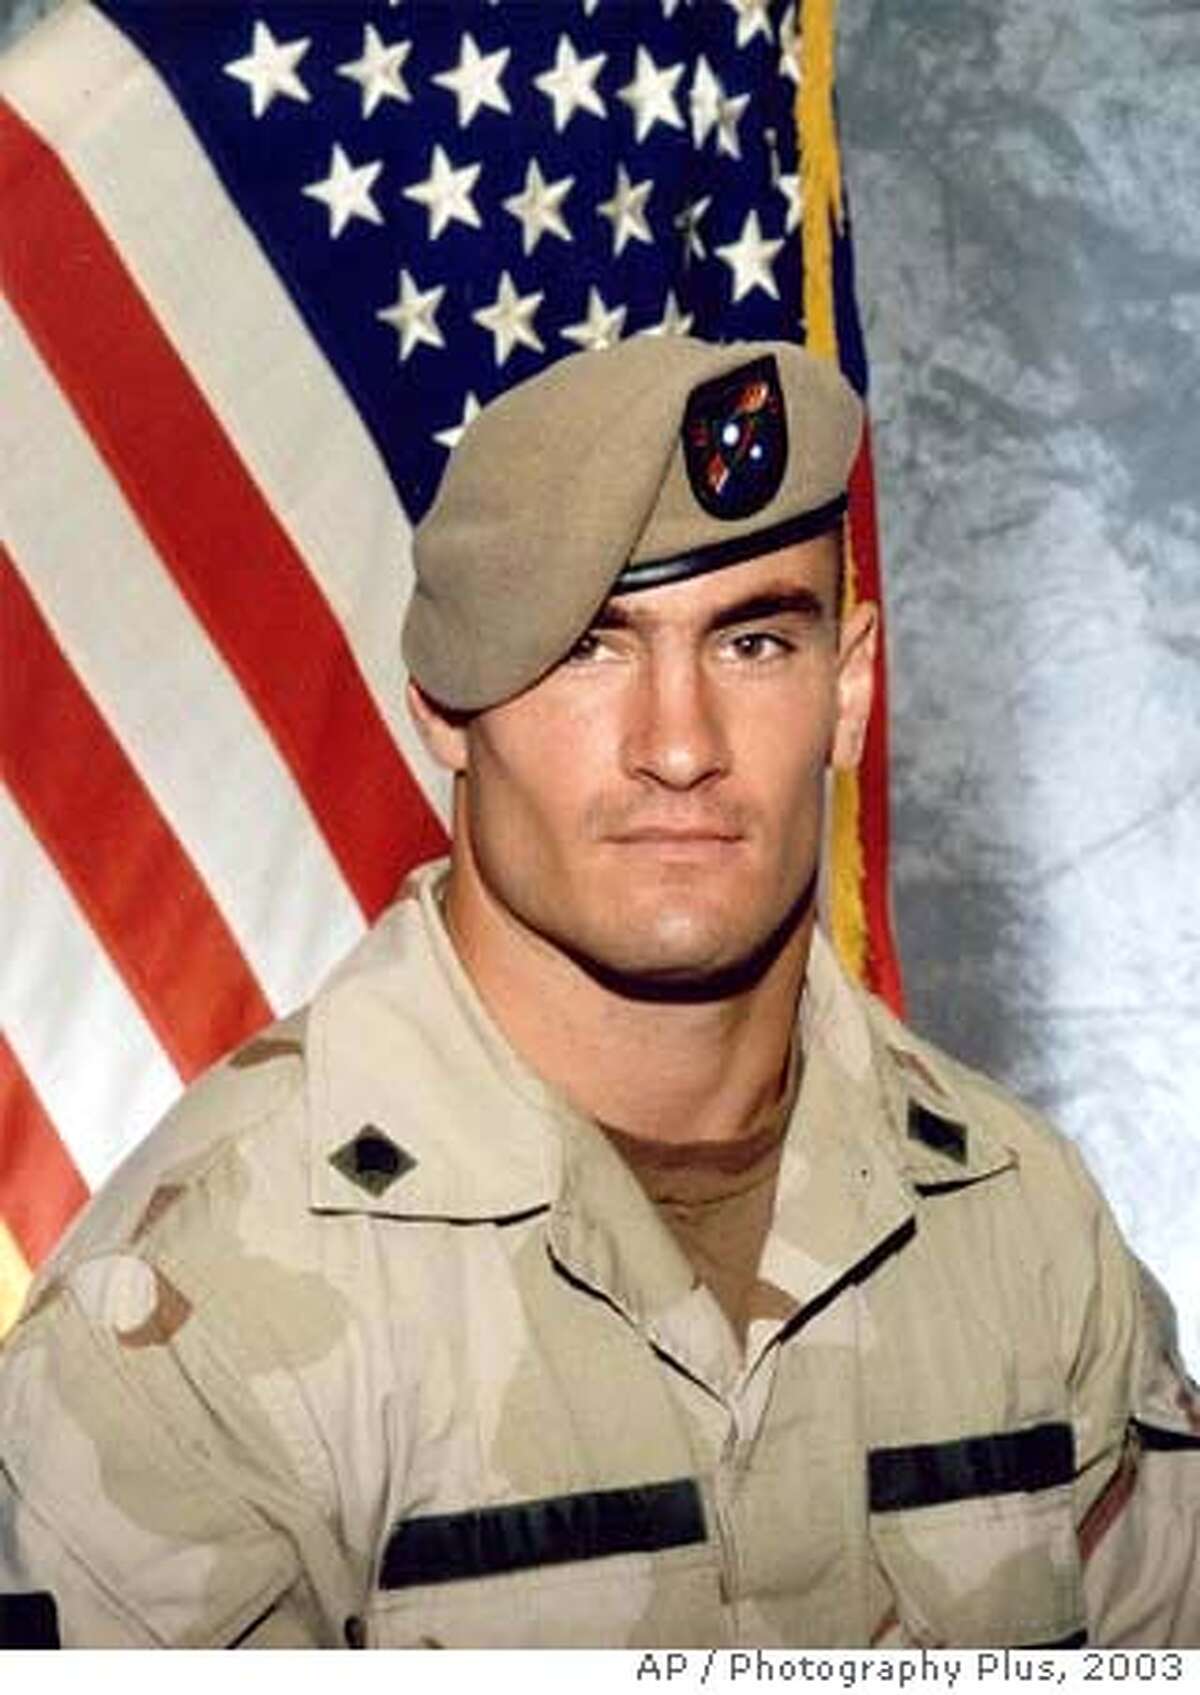 ** FILE ** Cpl. Pat Tillman is seen in a this 2003 file photo provided by Photography Plus. A House committee has scheduled hearings on the string of misleading statements by the military following the friendly fire death of Pat Tillman in Afghanistan and the kidnapping and rescue of Pvt. Jessica Lynch in Iraq, congressional officials said Tuesday, April 10, 2007. (AP Photo/Photography Plus via Williamson Stealth Media Solutions, FILE) 2003 FILE PHOTO PROVIDED BY PHOTOGRAPHY PLUS.